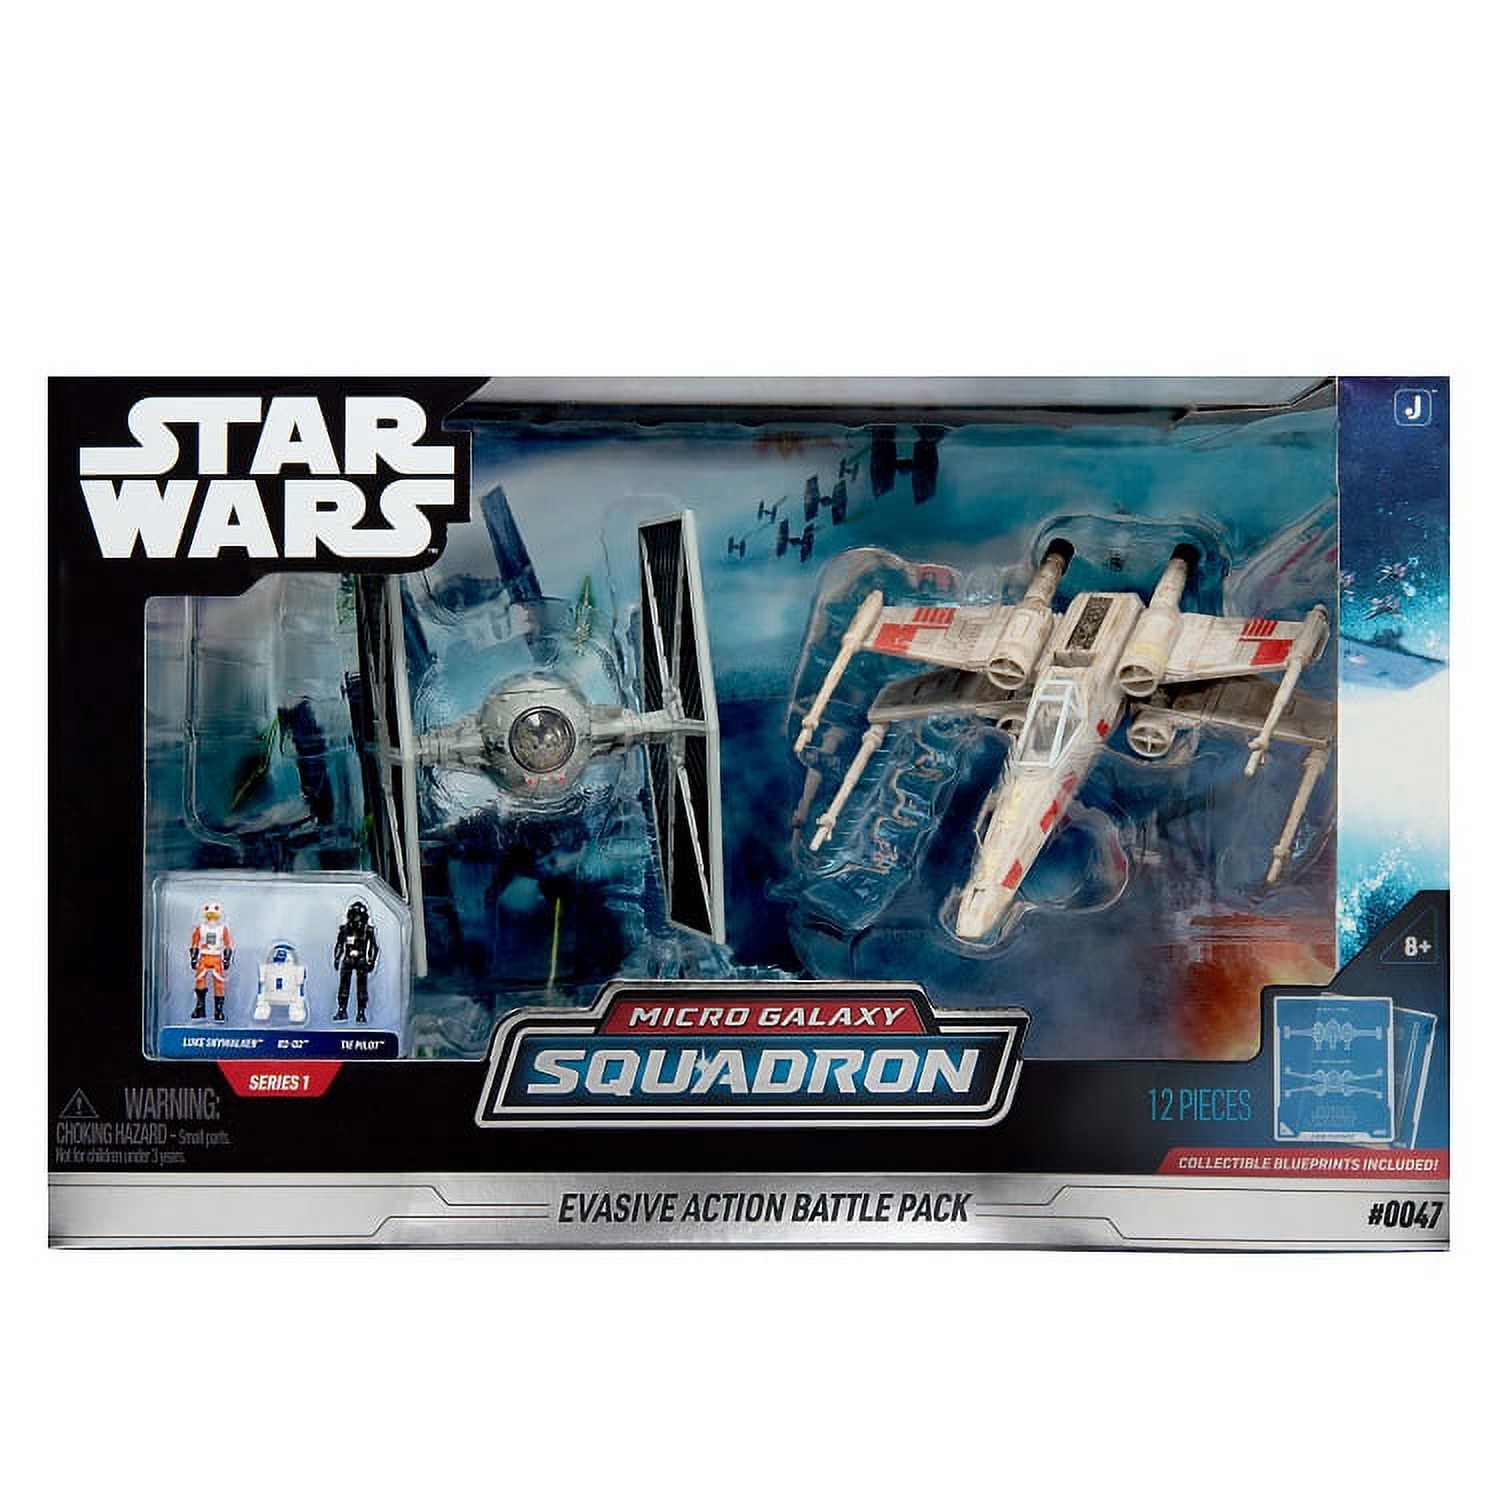 Star Wars Micro Galaxy Squadron Multicolor Evasive Action Battle Pack - image 2 of 5